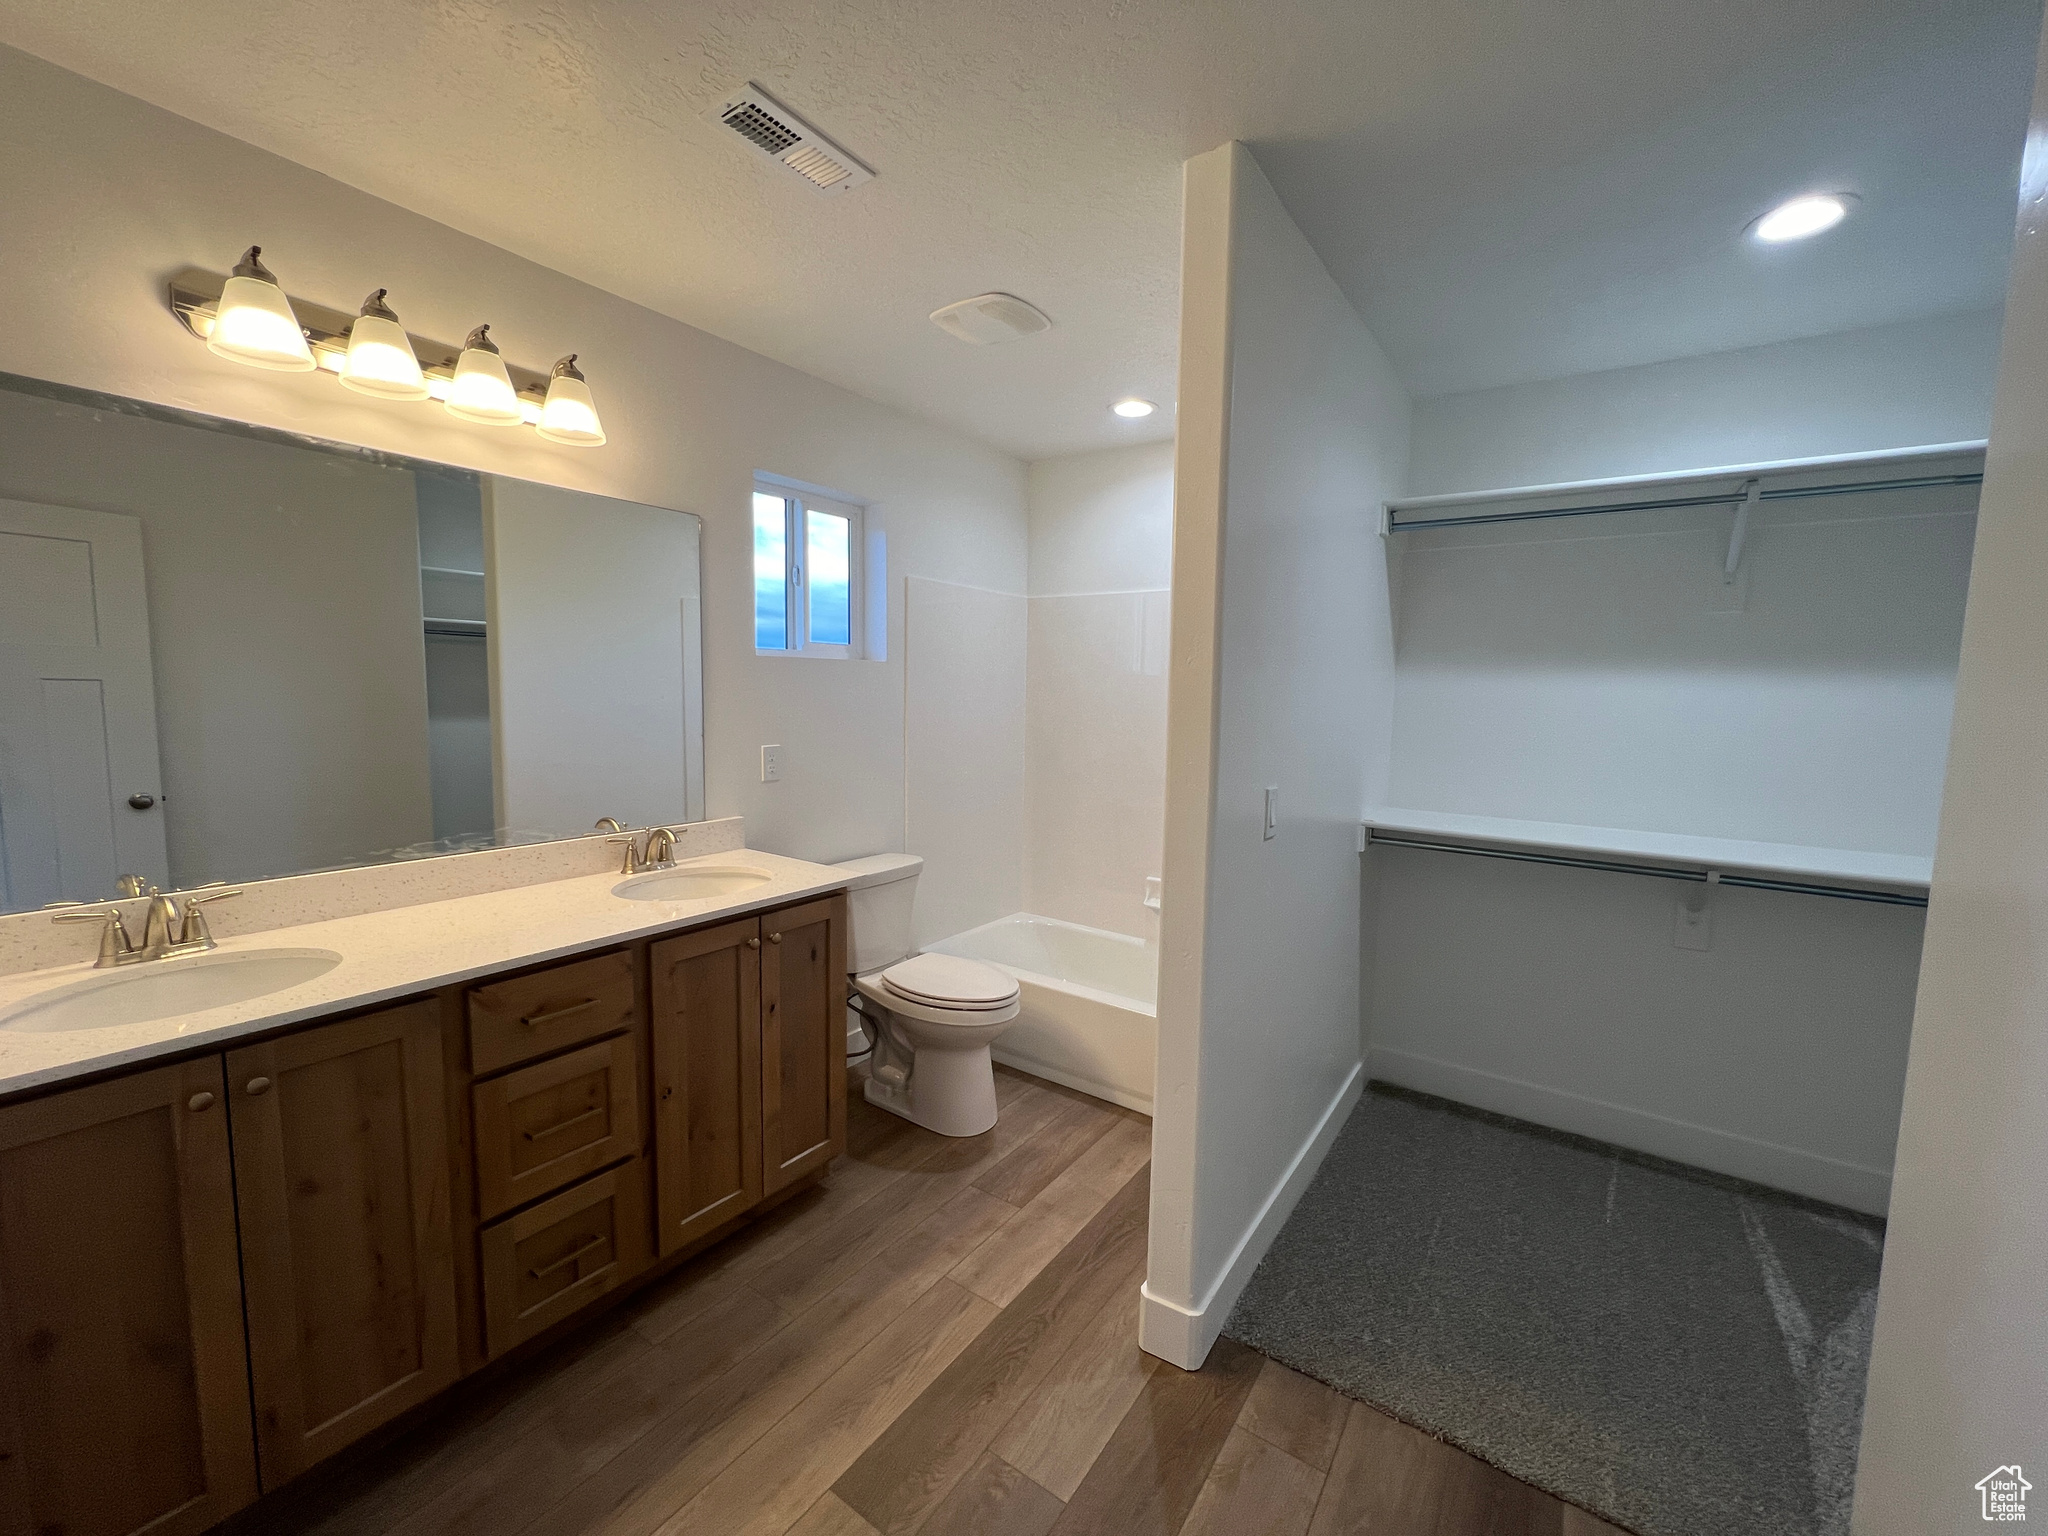 Full master bathroom with toilet, dual sinks, wood-type flooring, oversized vanity, and shower / tub combination